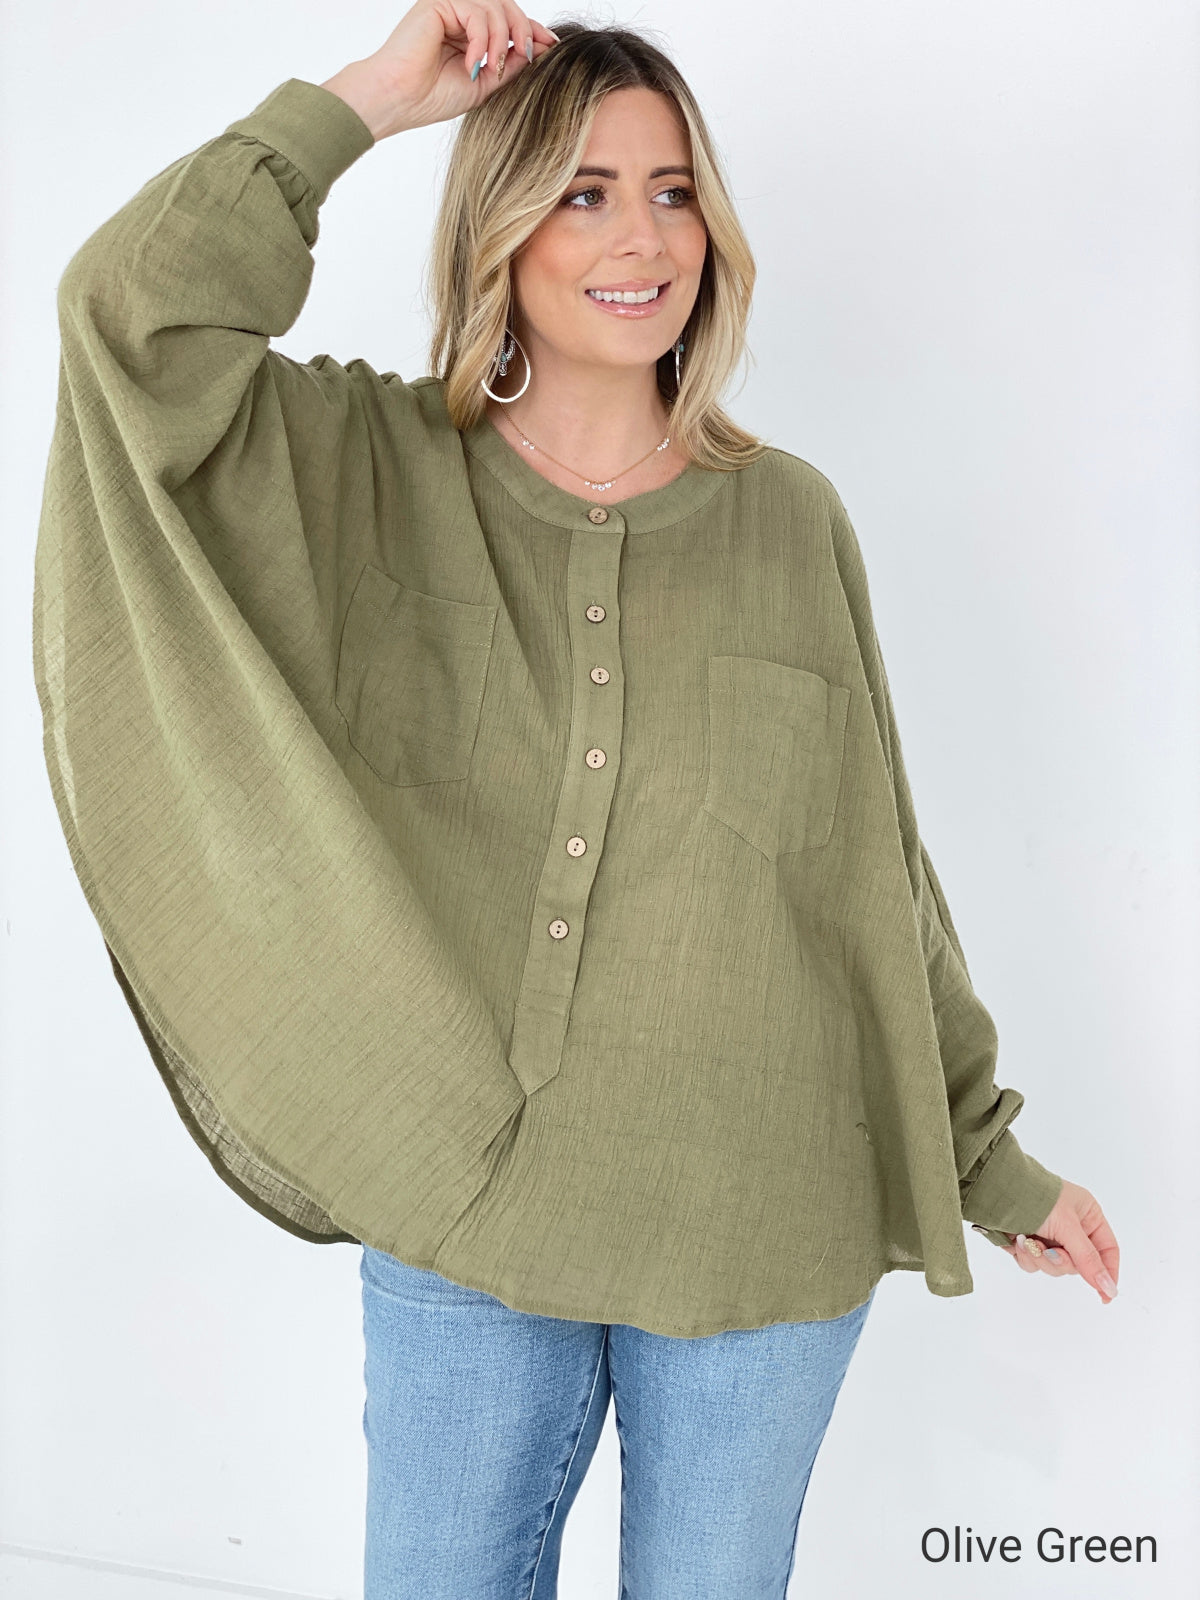 Easel Textured Cotton Linen Oversized Top - Ships from The US - women's blouse at TFC&H Co.